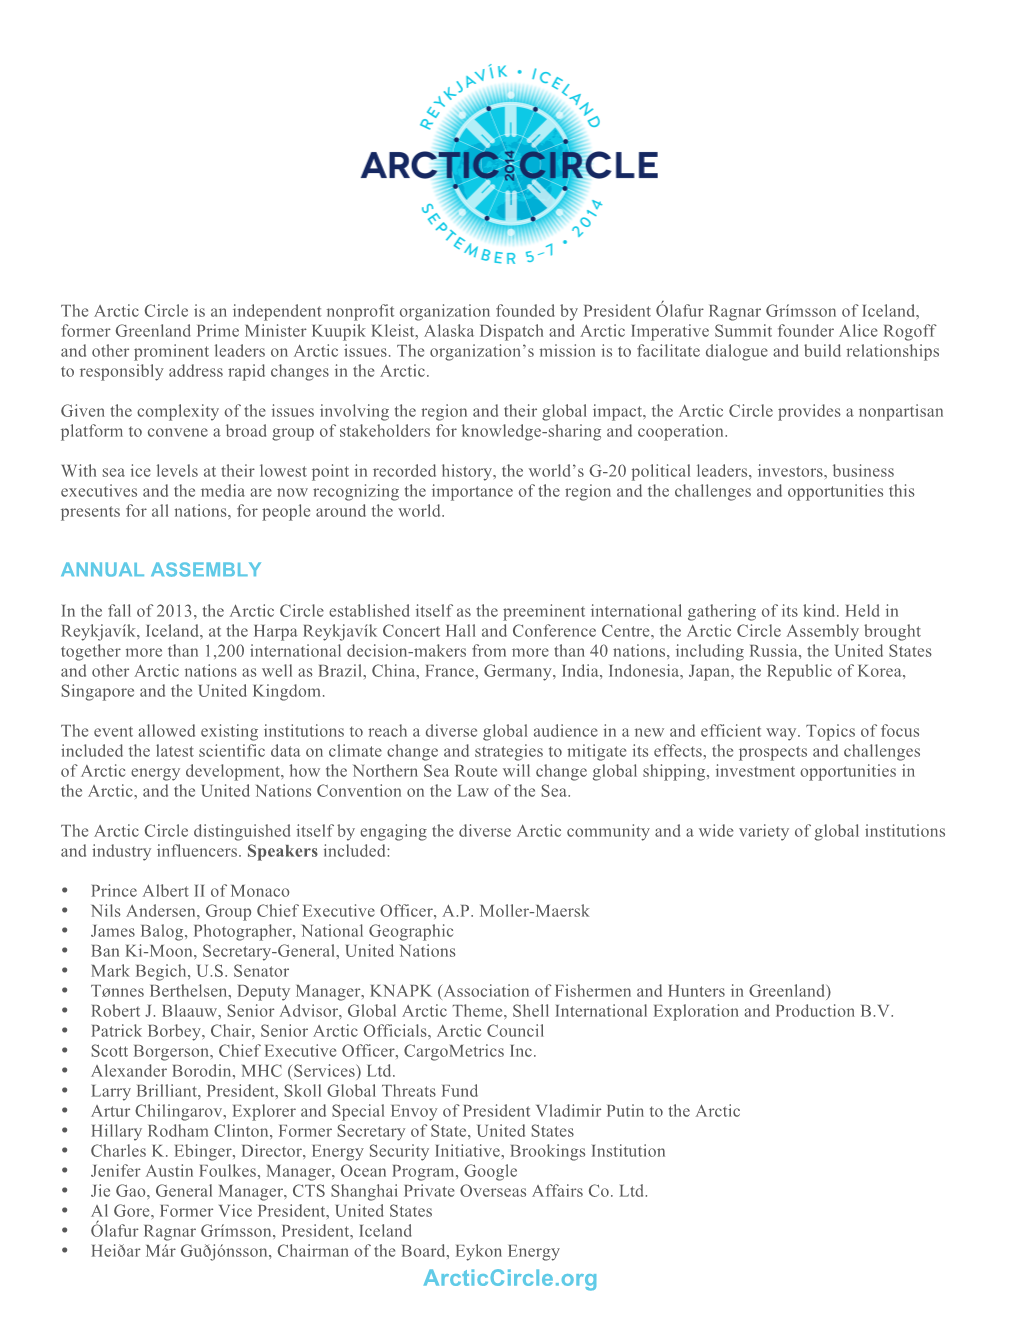 The Arctic Circle Is an Independent Nonprofit Organization Founded By